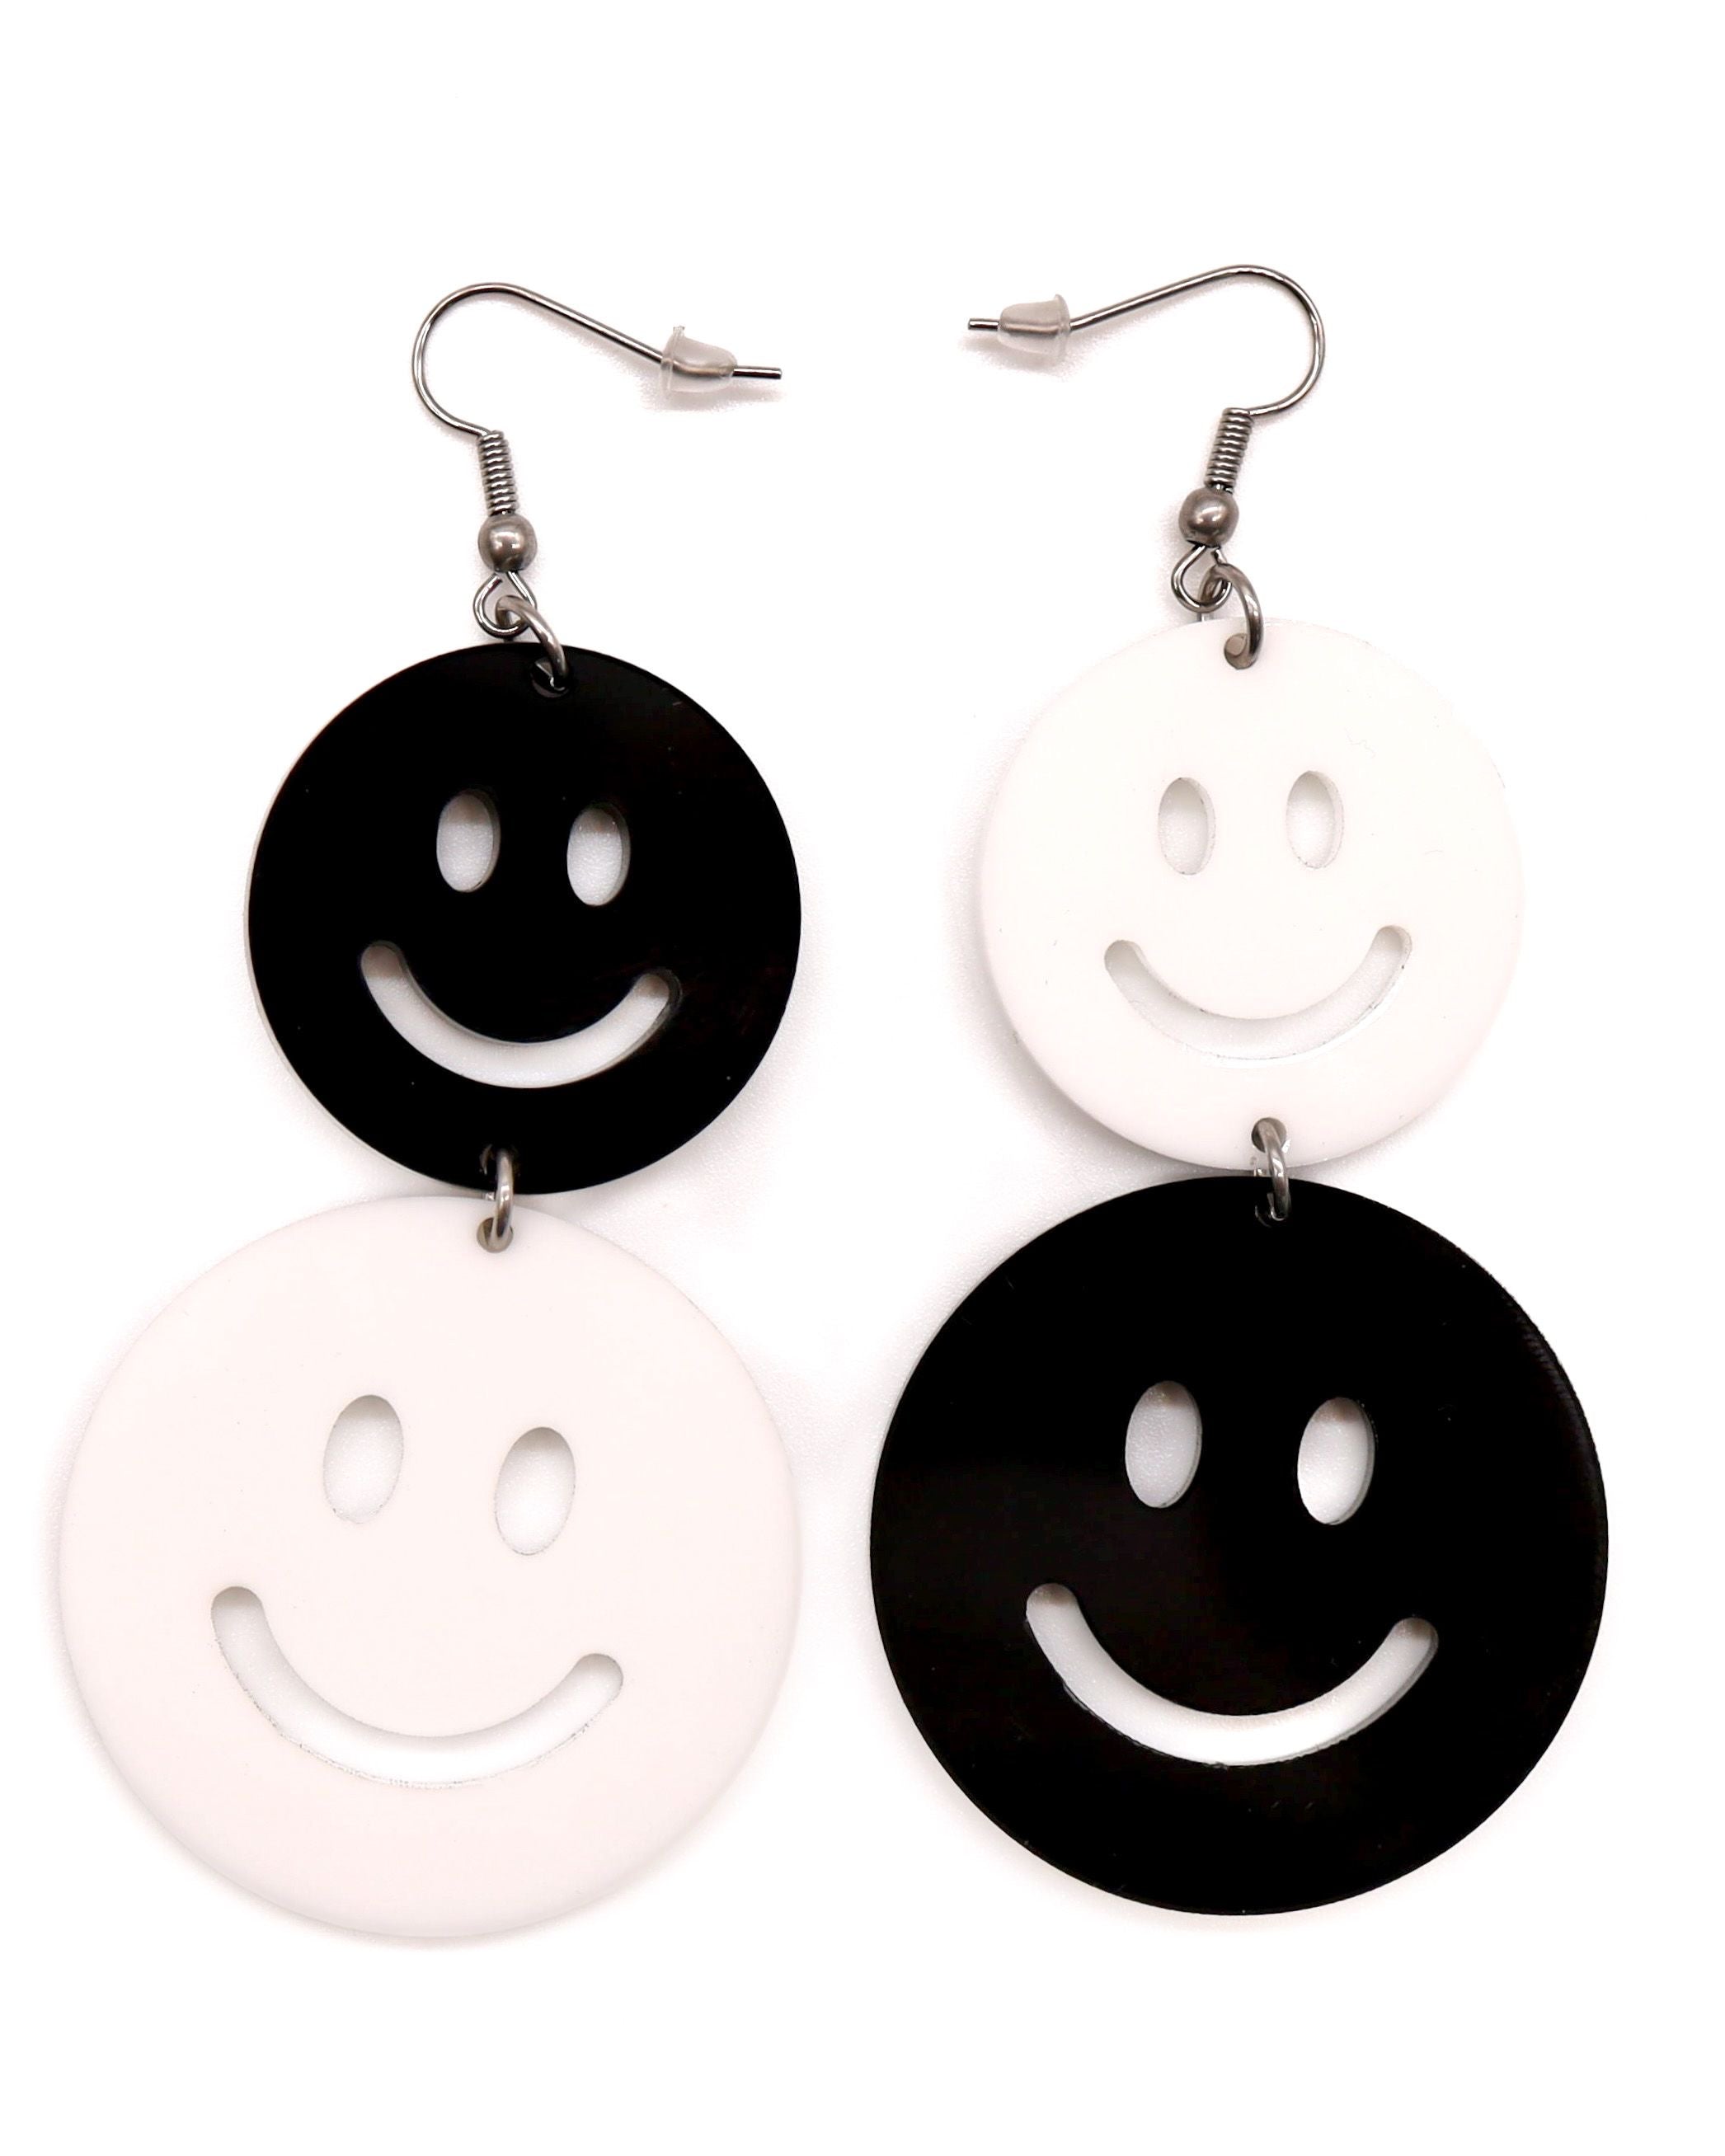 All Smiles Tiered Earrings, Dangle Earrings, - One Stop Rave